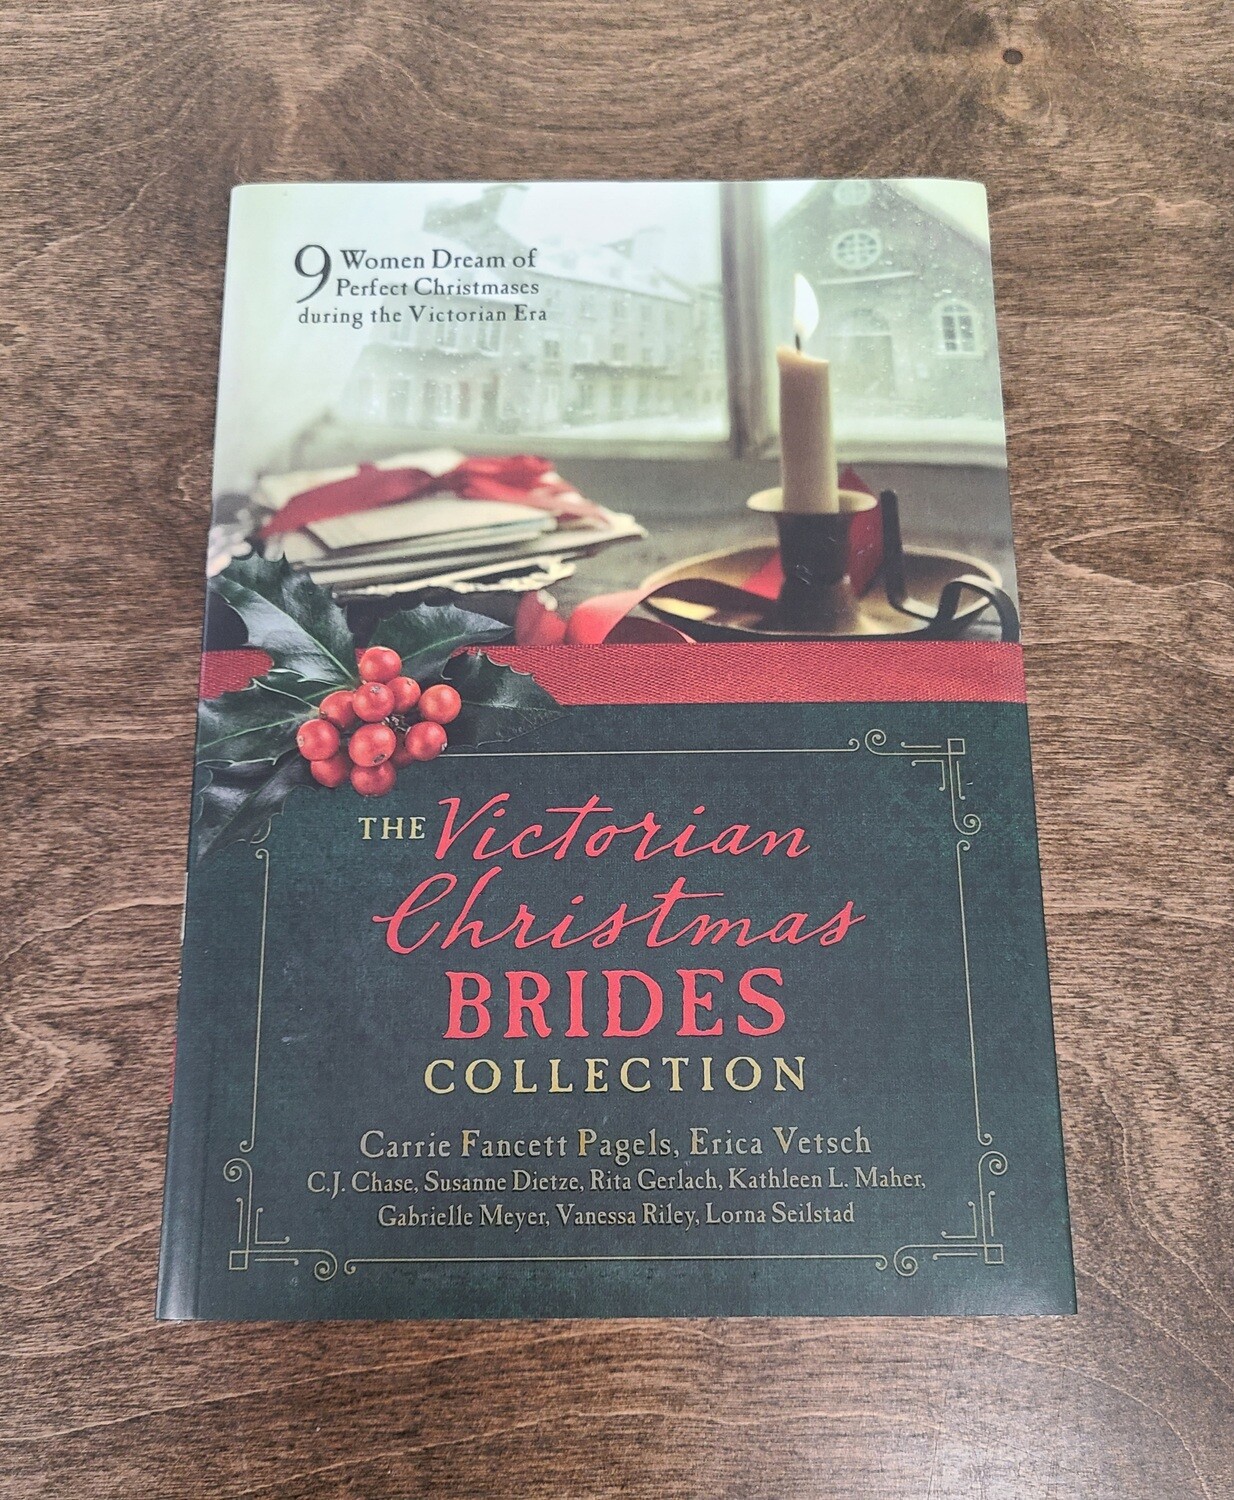 The Victorian Christmas Brides Collection by Carrie Fancett Pagels and Various Authors